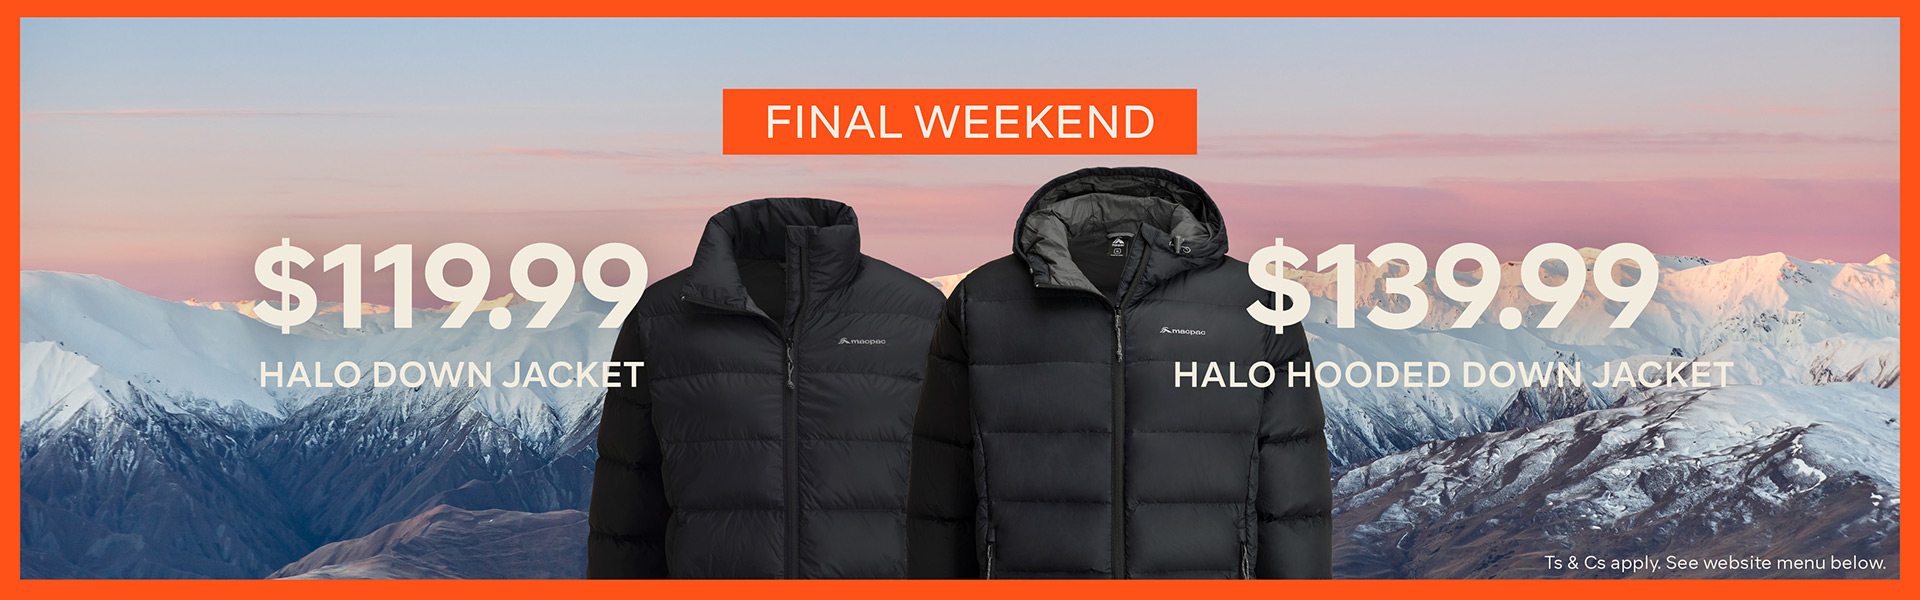 LIMITED TIME ONLY - $119.99 Halo Down Jacket - 139.99 Halo Hooded Down Jacket